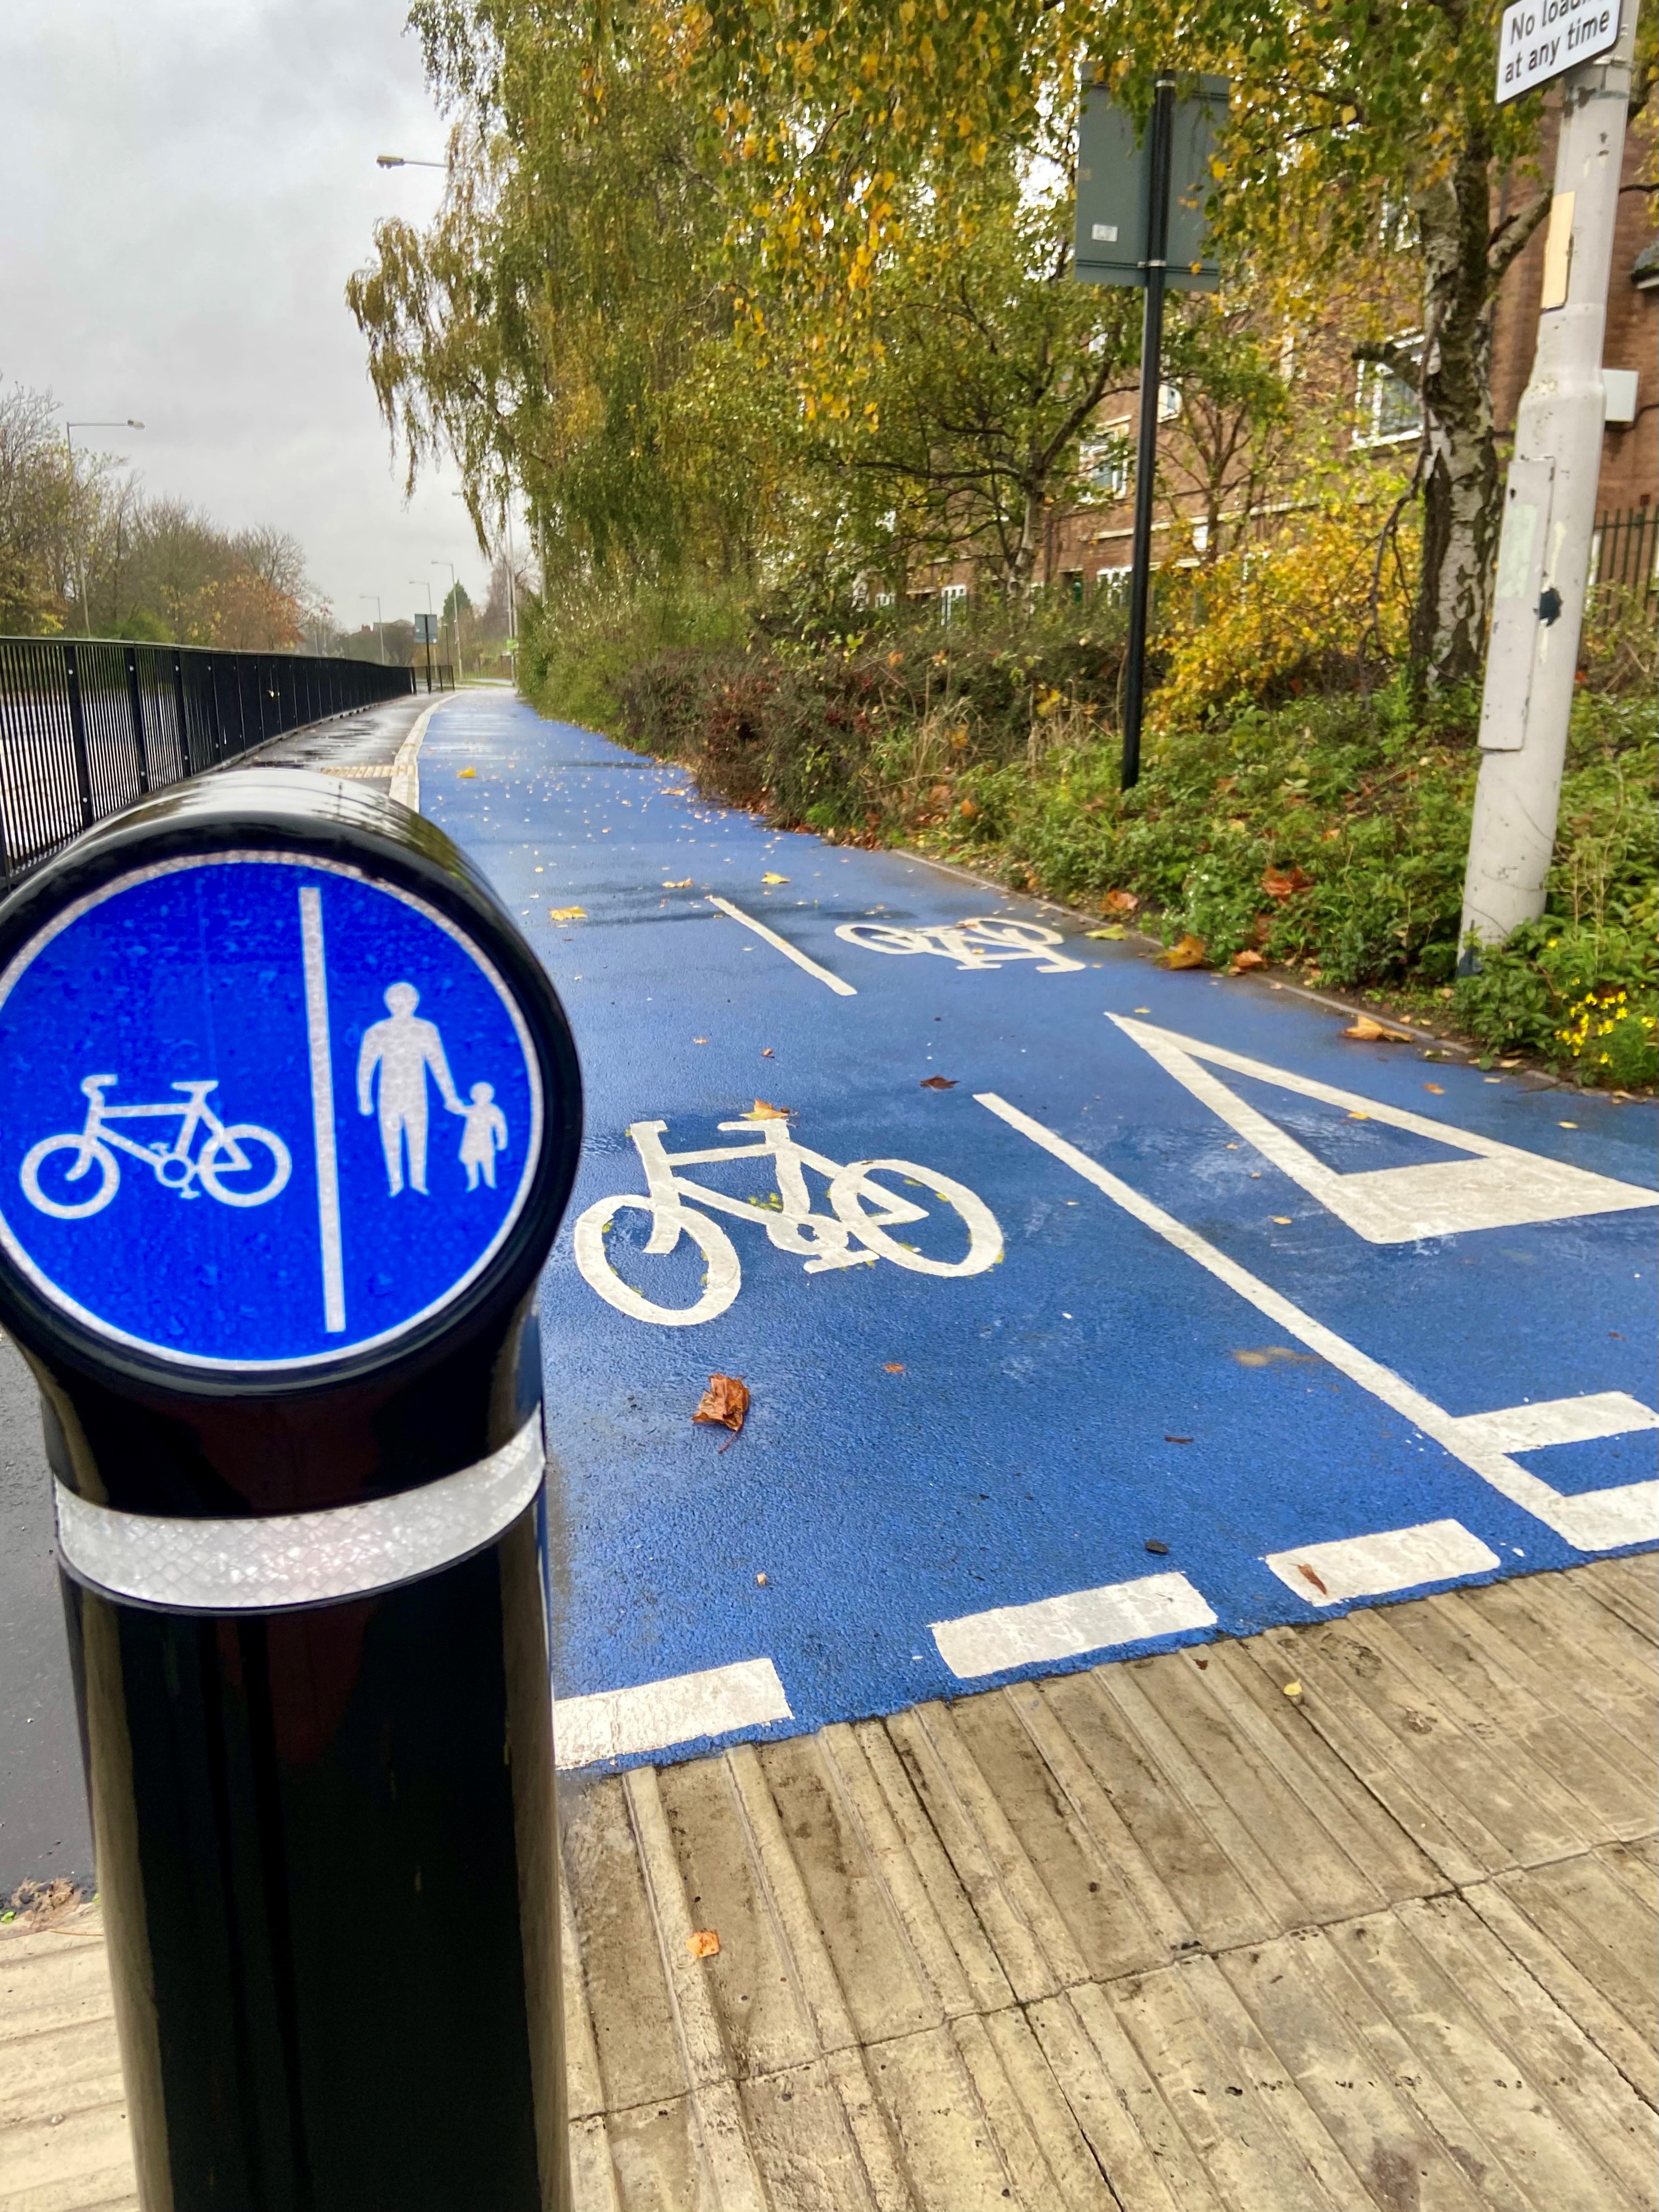 Image shows a blue cycle lane in two directions.